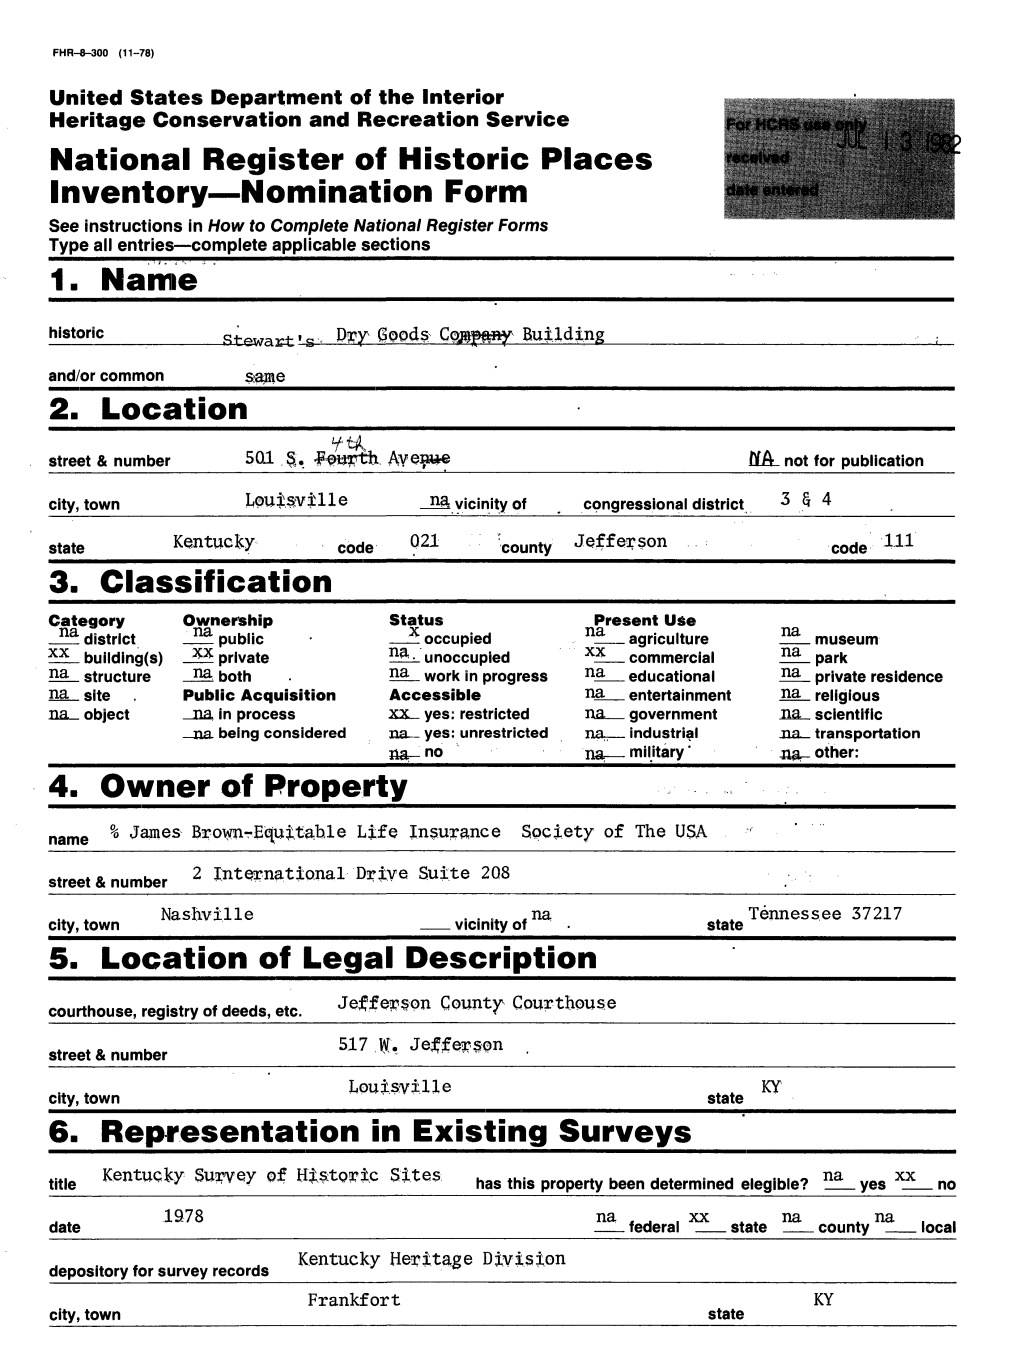 National Register of Historic Places Inventory Nomination Form 1. Name 4. Owner of Property 5. Location of Legal Description 6